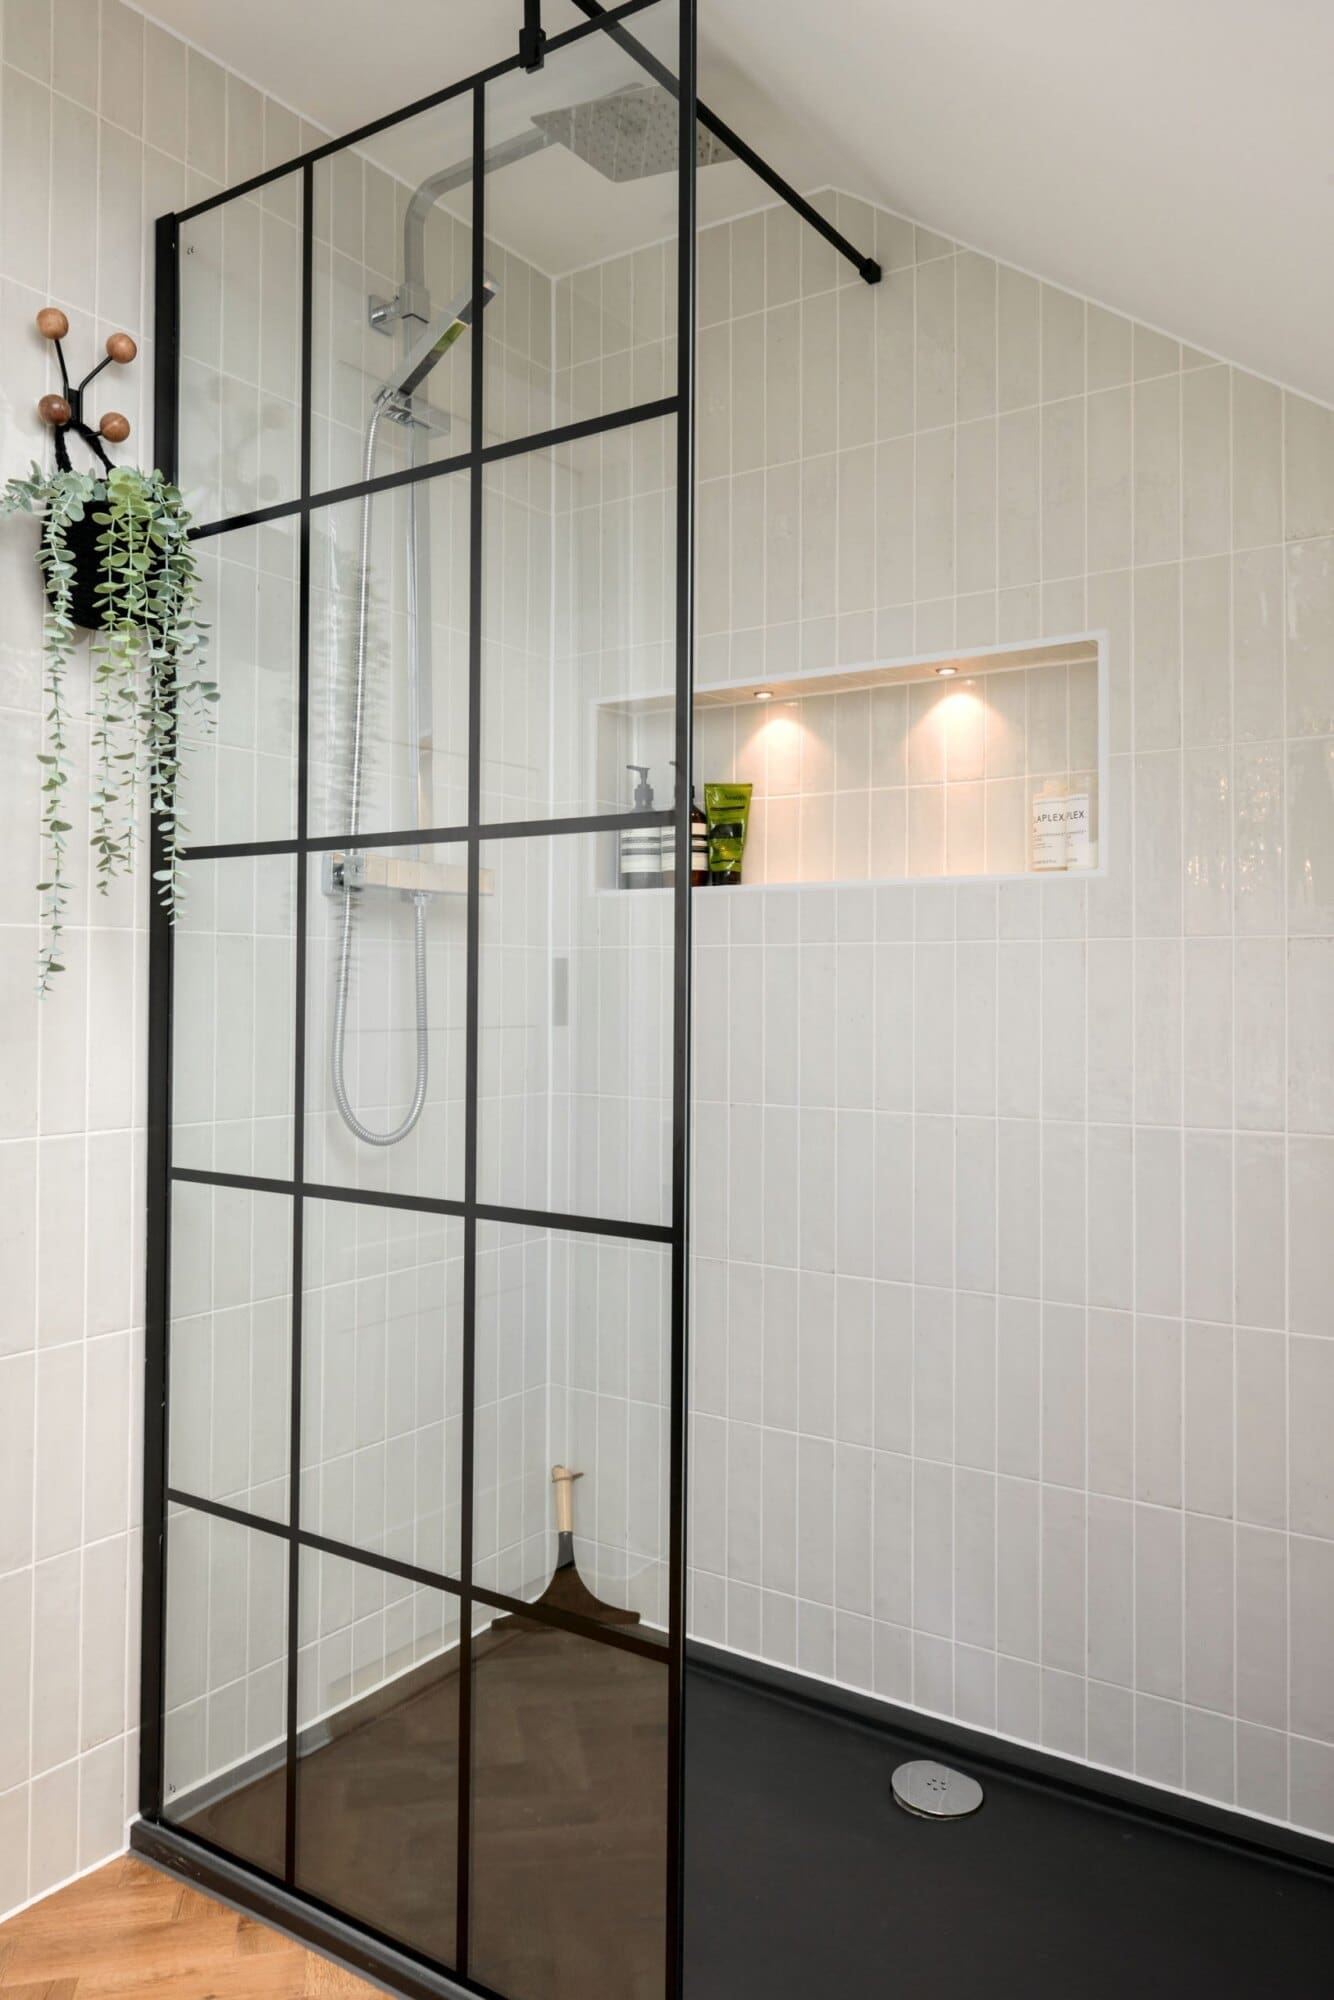 pitched roof loft shower suite with glass shower screen and wall alcove